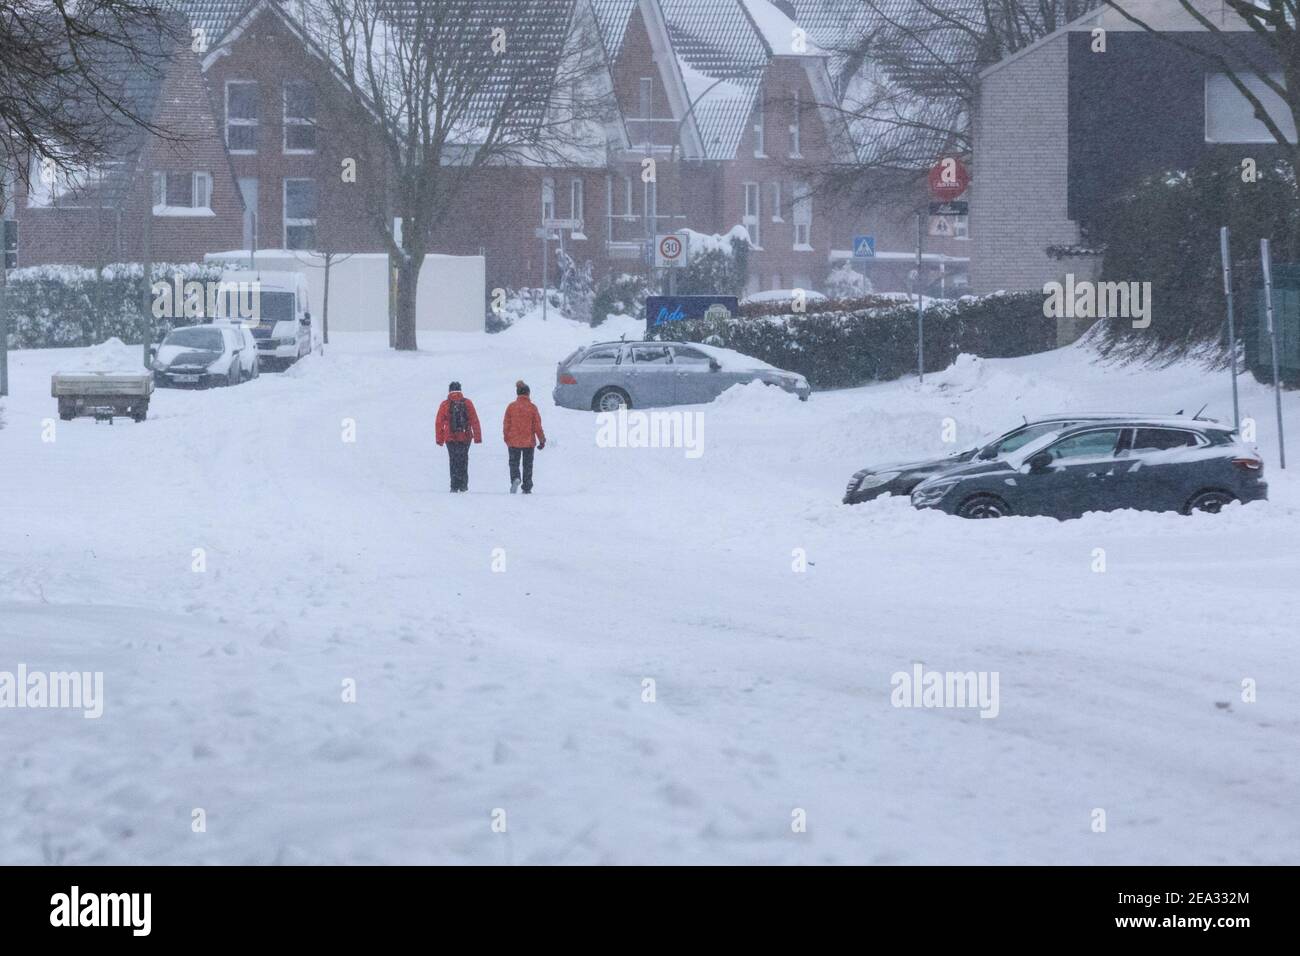 Haltern, NRW, Germany. 07th Feb, 2021. People in the village of Sythen near Haltern make the most of the circa 30 cms of fresh snow. A severe weather warning is in place for parts of North Rhine-Westphalia and other areas after snow storms brought traffic chaos and problems with public transport. It is set to continue snowing, with temperatures well below zero for the next few days. Credit: Imageplotter/Alamy Live News Stock Photo